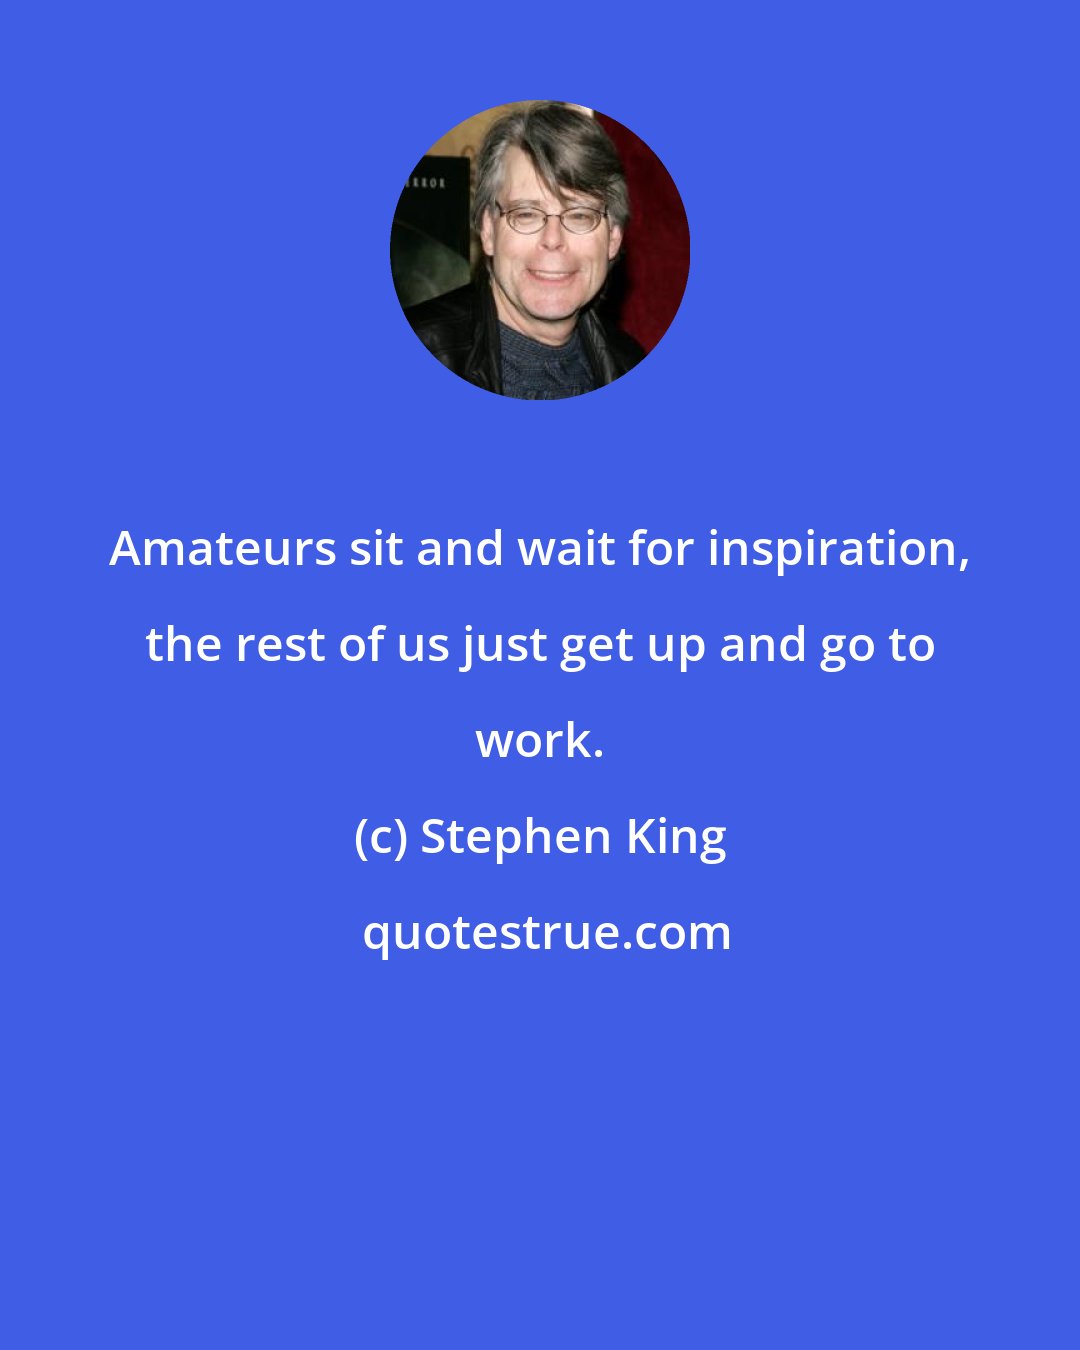 Stephen King: Amateurs sit and wait for inspiration, the rest of us just get up and go to work.